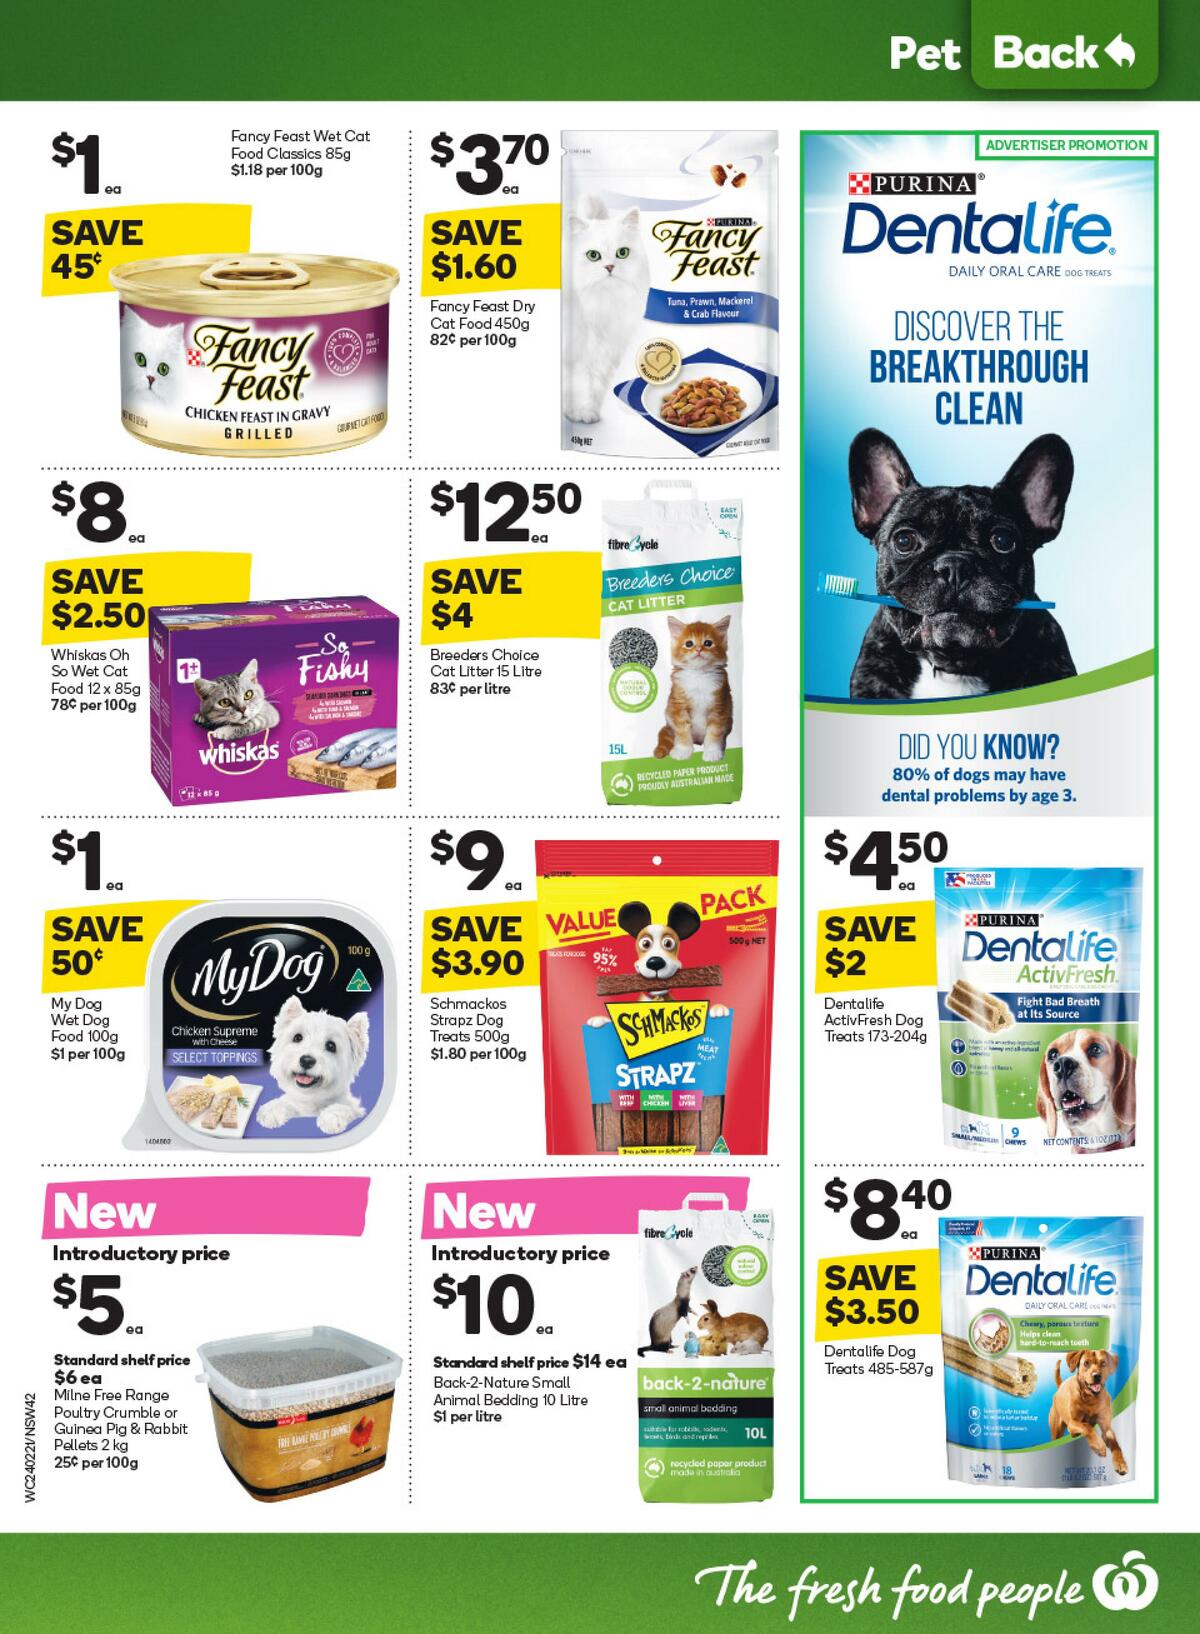 Woolworths Catalogues from 24 February